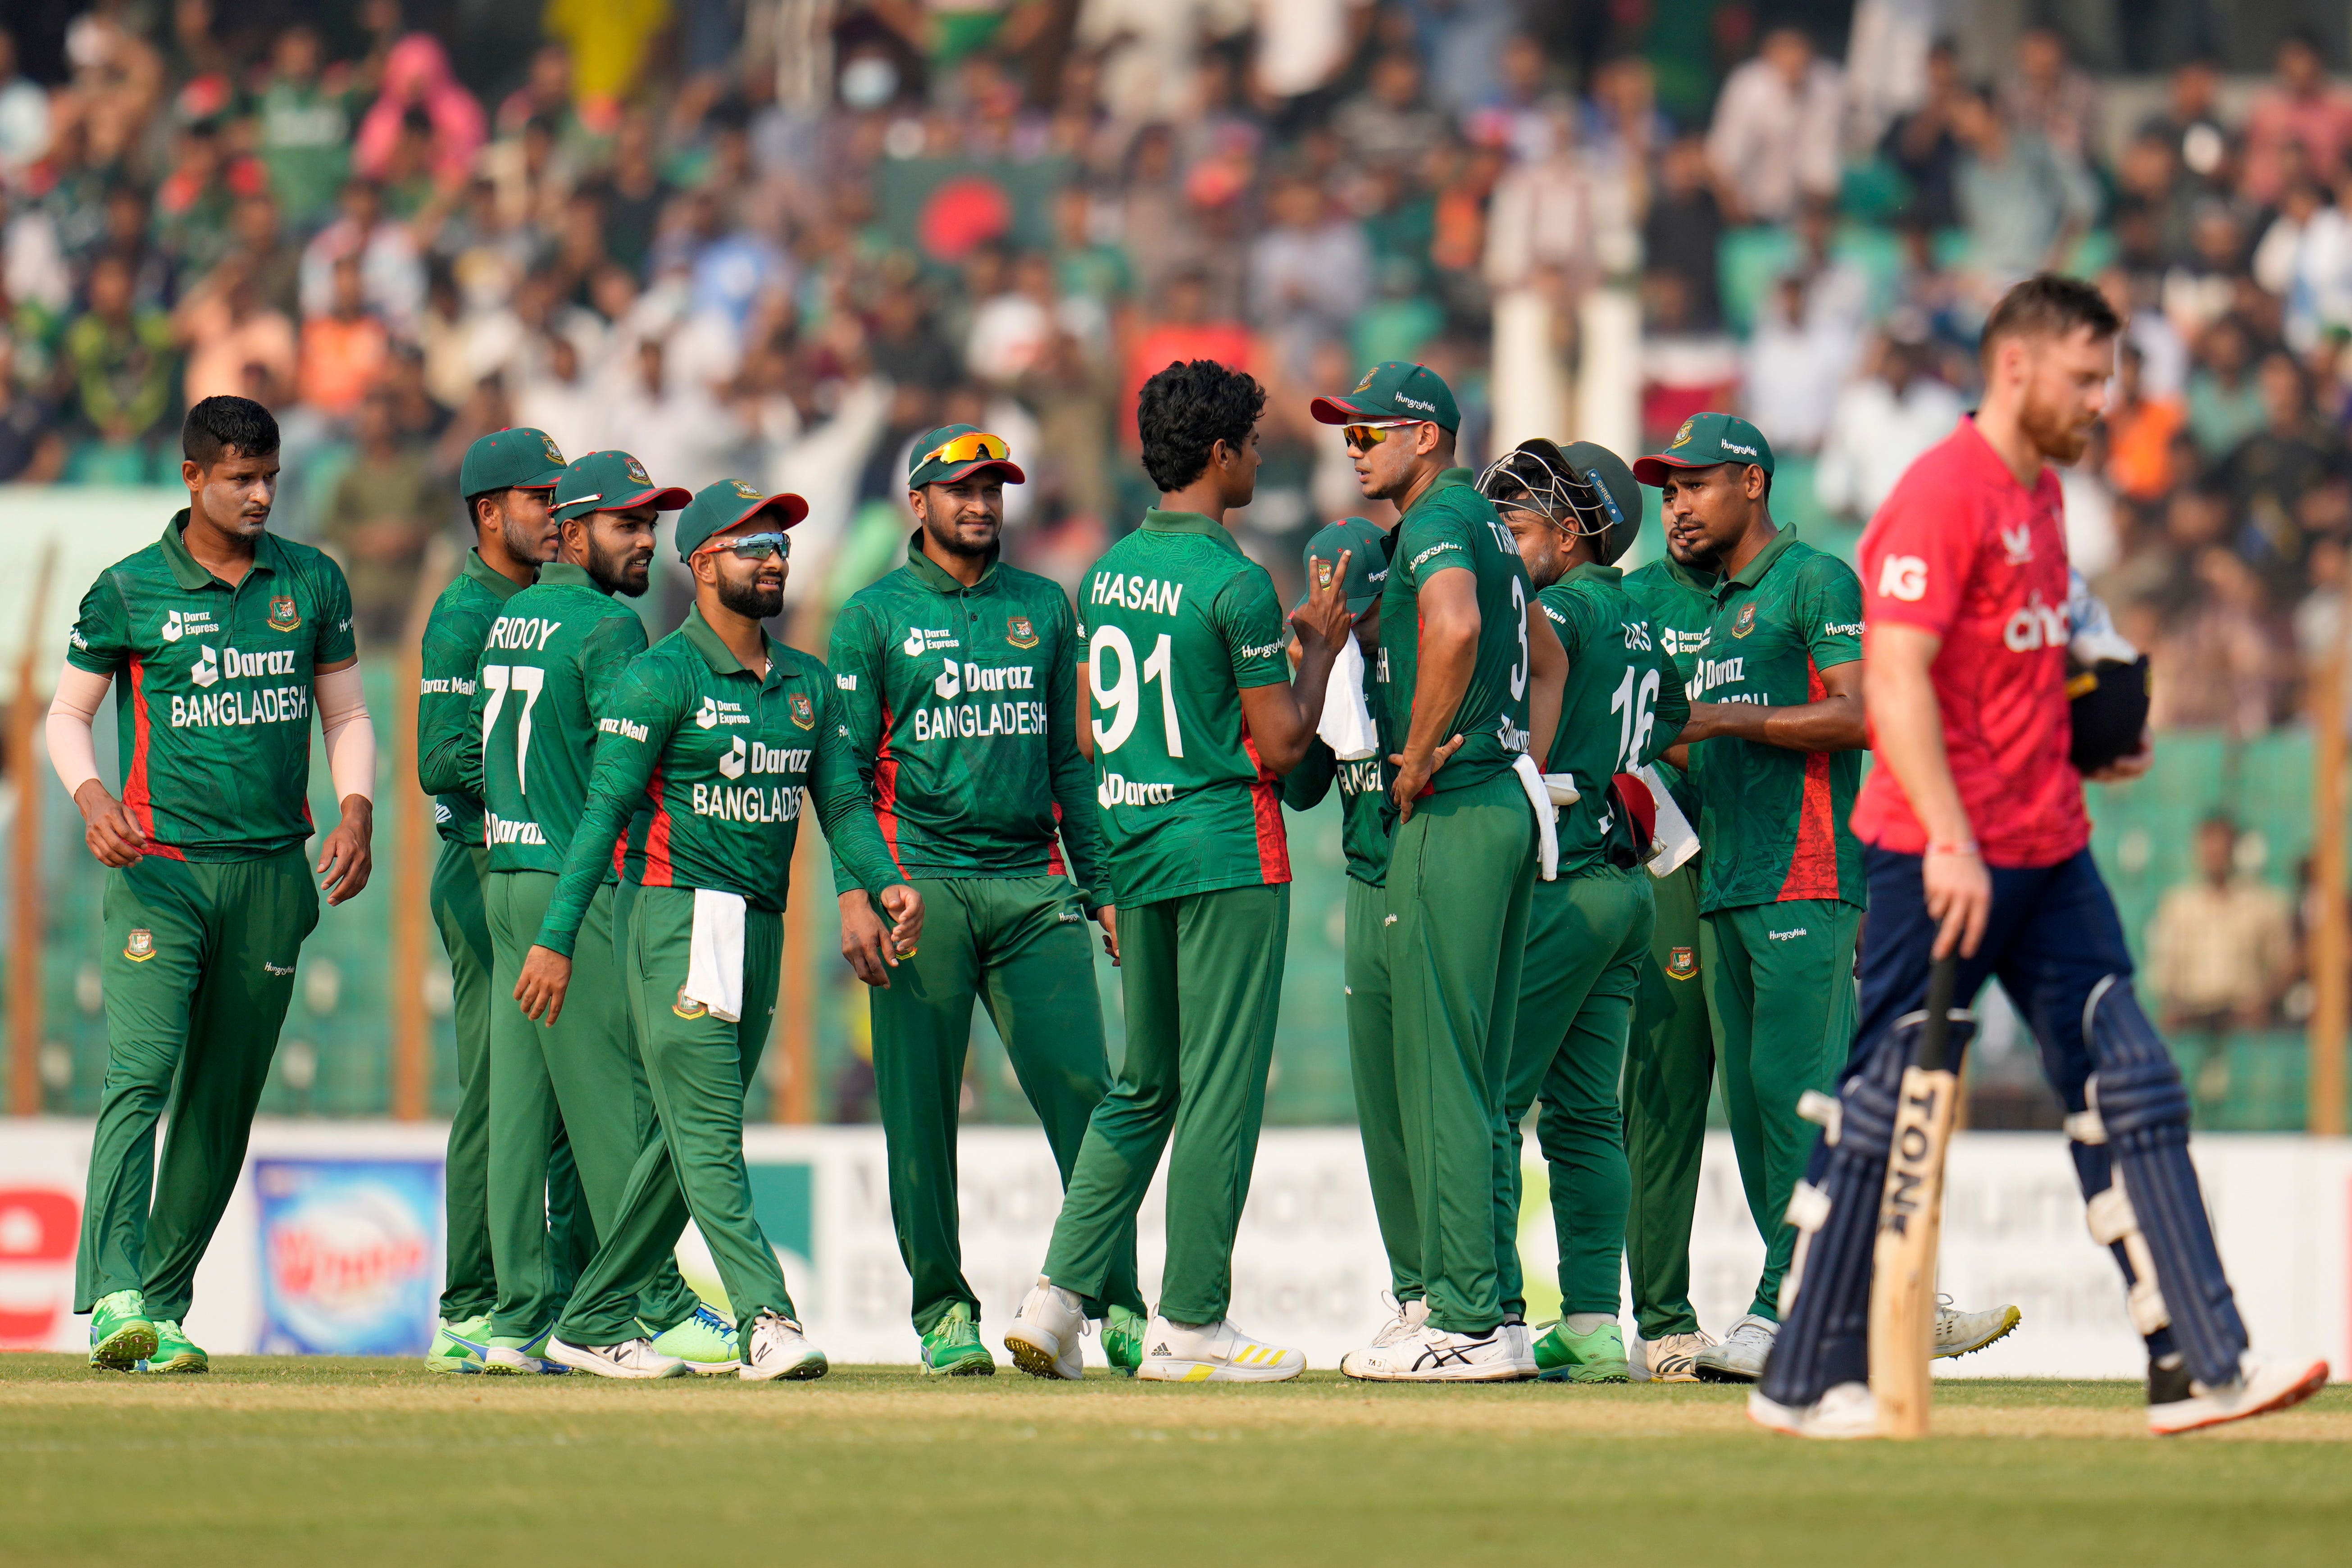 England suffer sixwicket defeat to Bangladesh in first T20I since